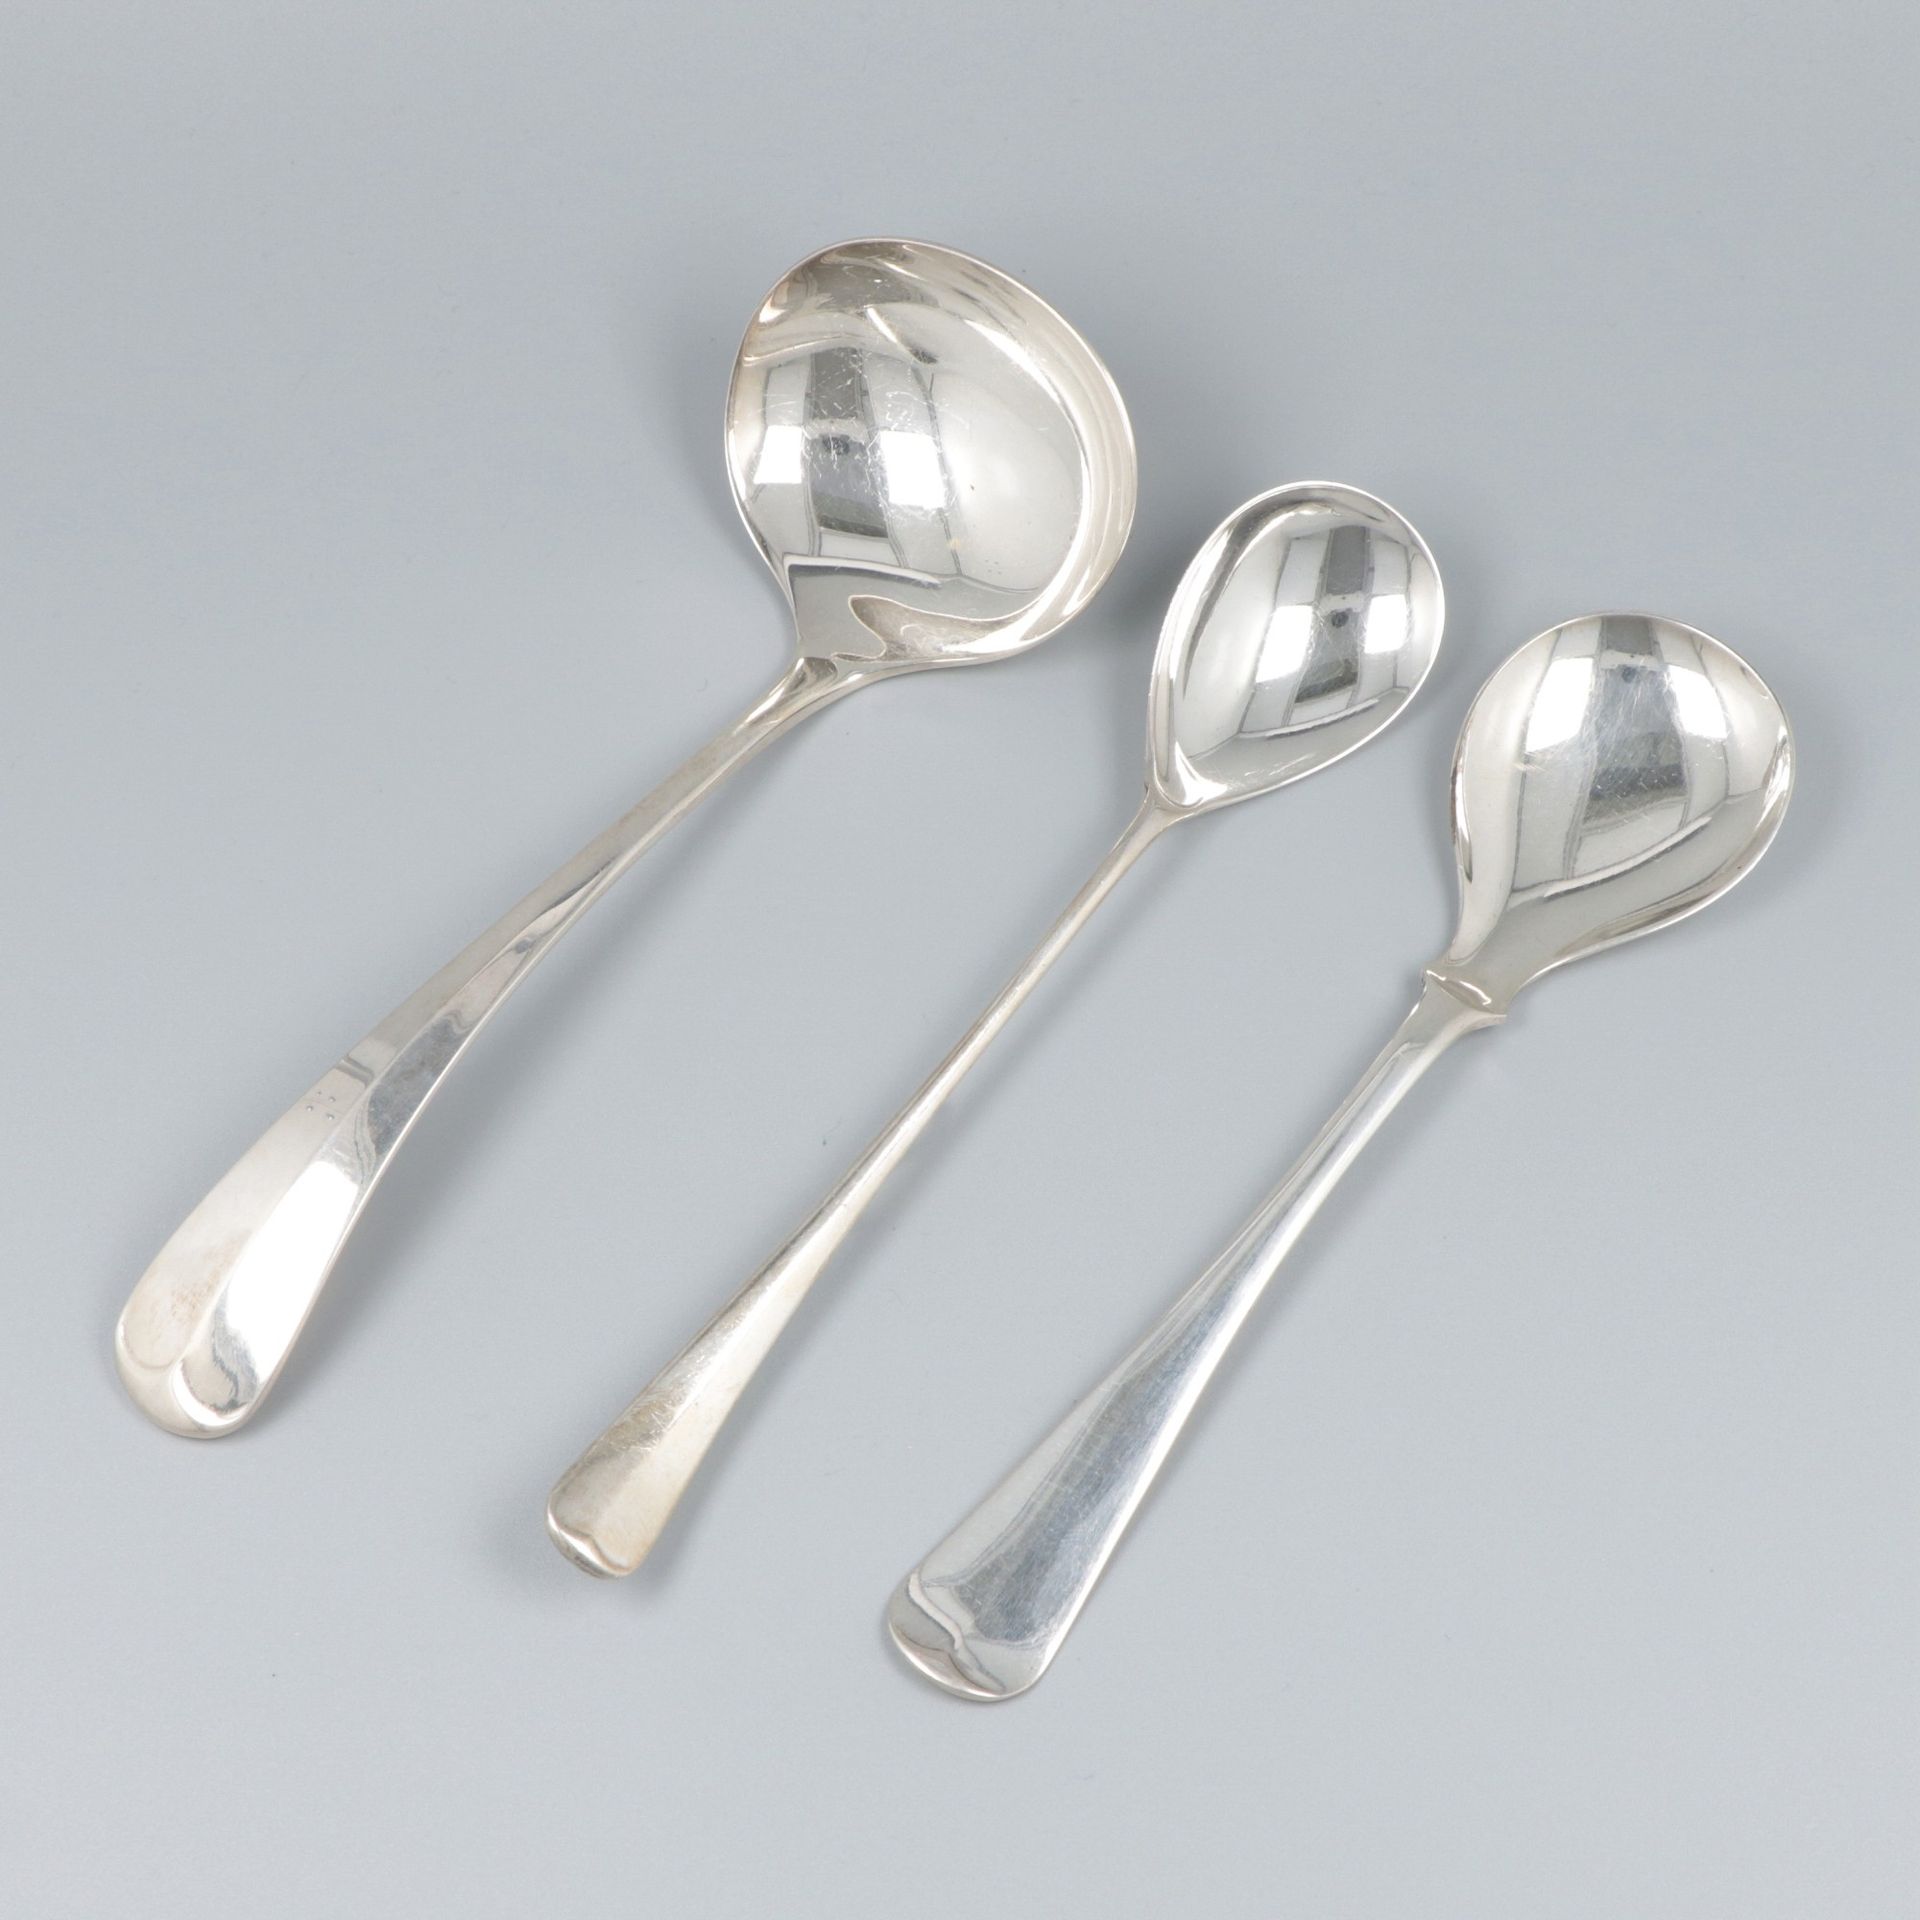 3-piece lot "Haags Lofje" silver / silver-plated spoons. "Haags Lofje", avec une&hellip;